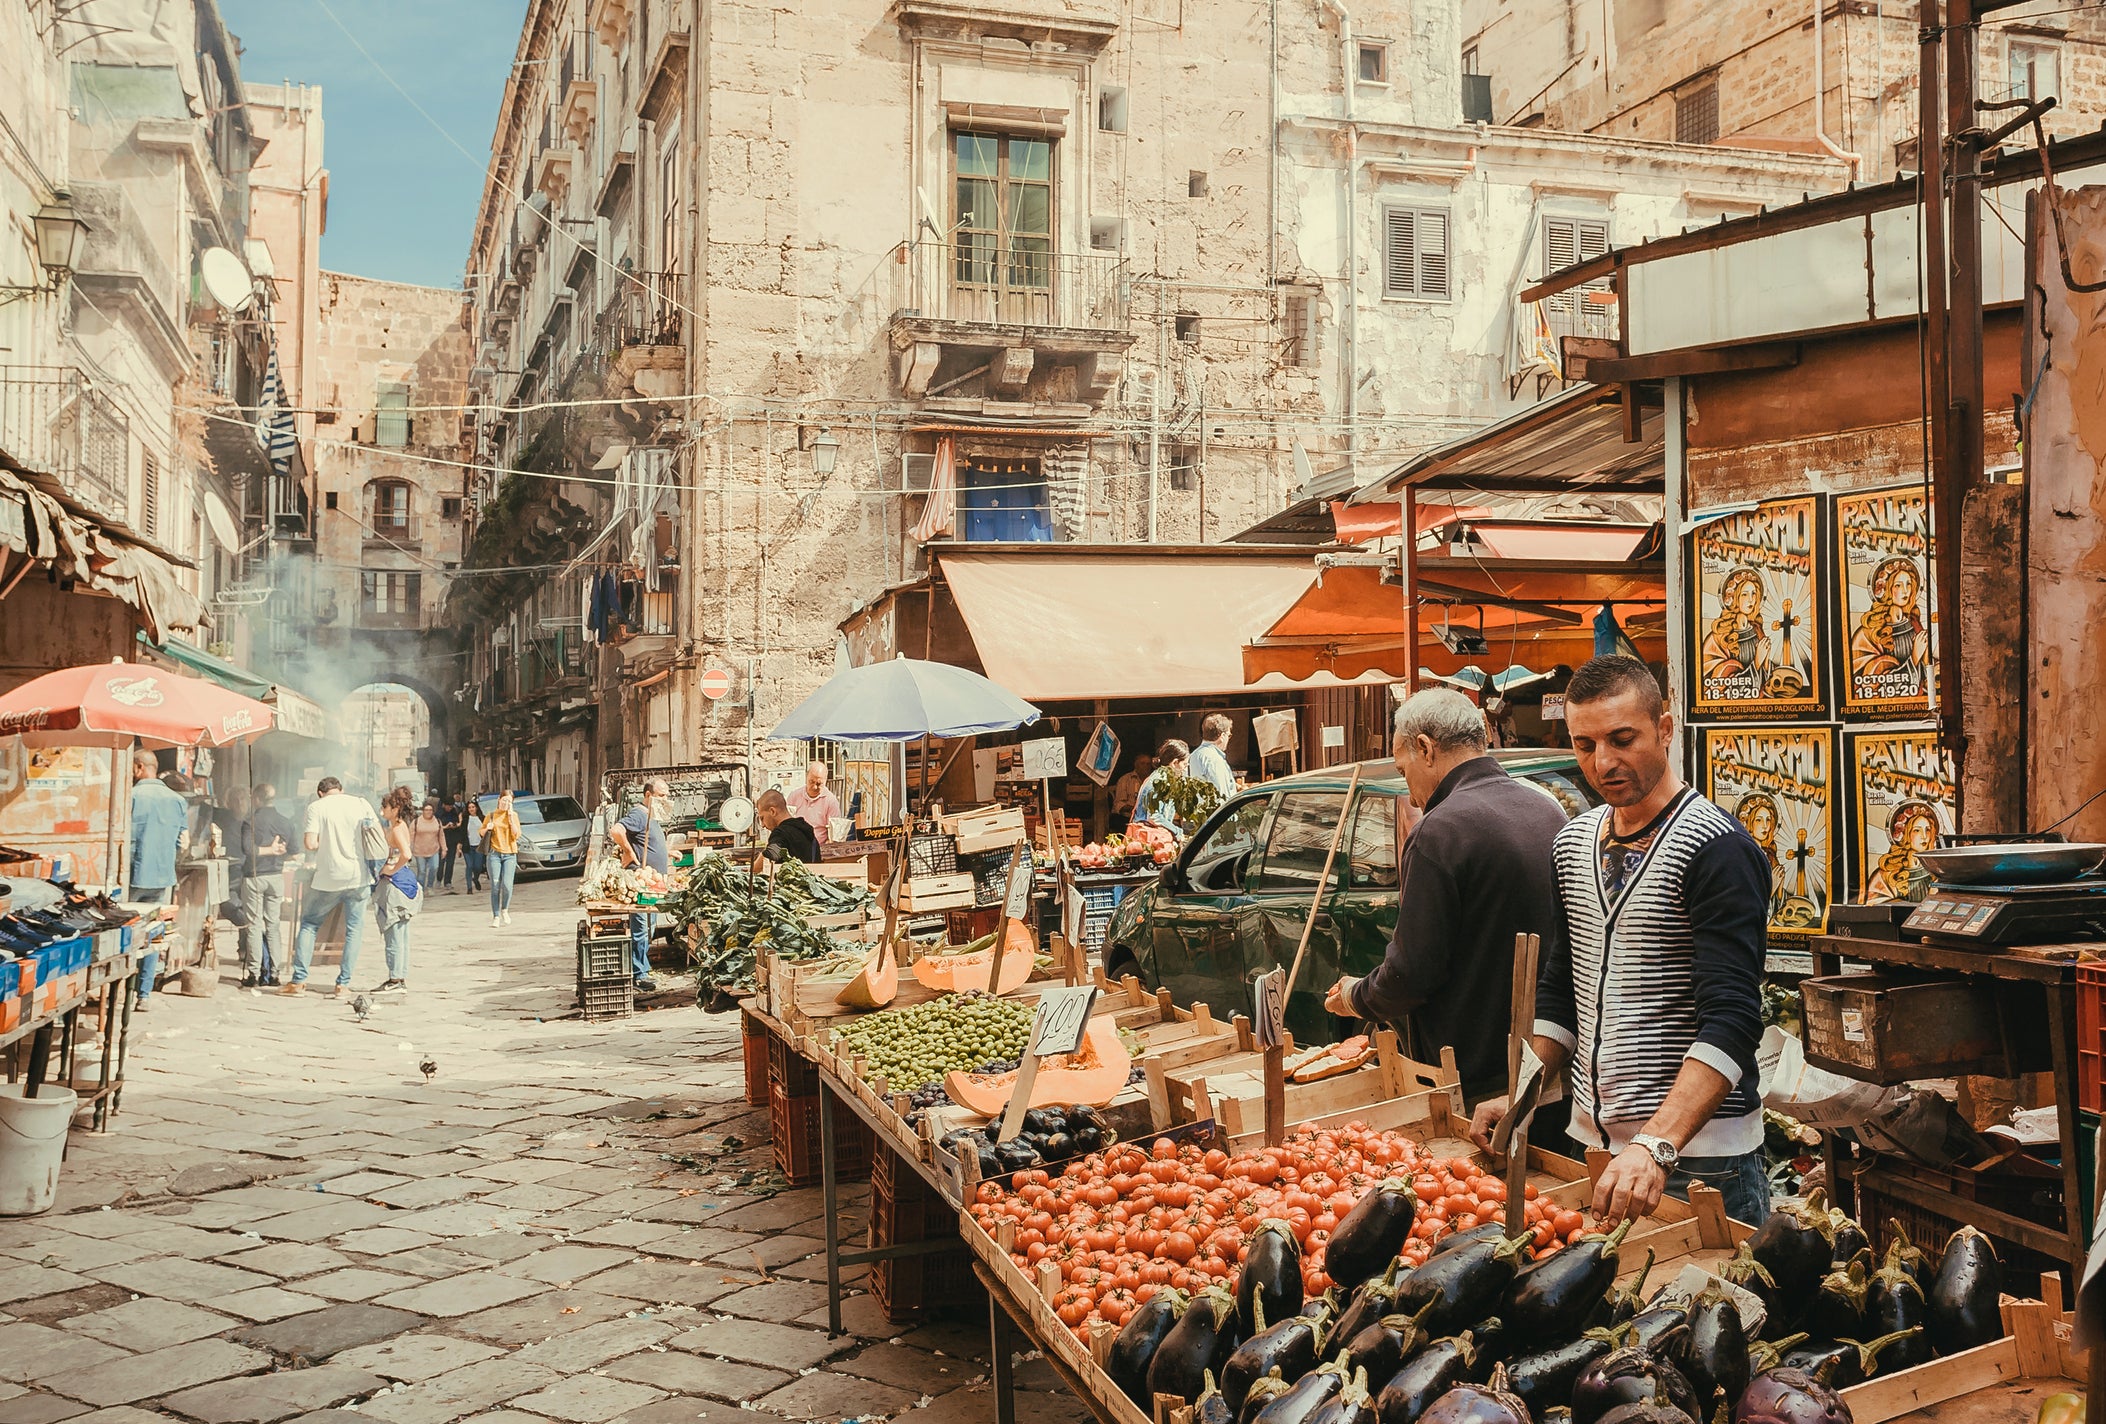 Wandering the many street markets in Palermo is great for visitors